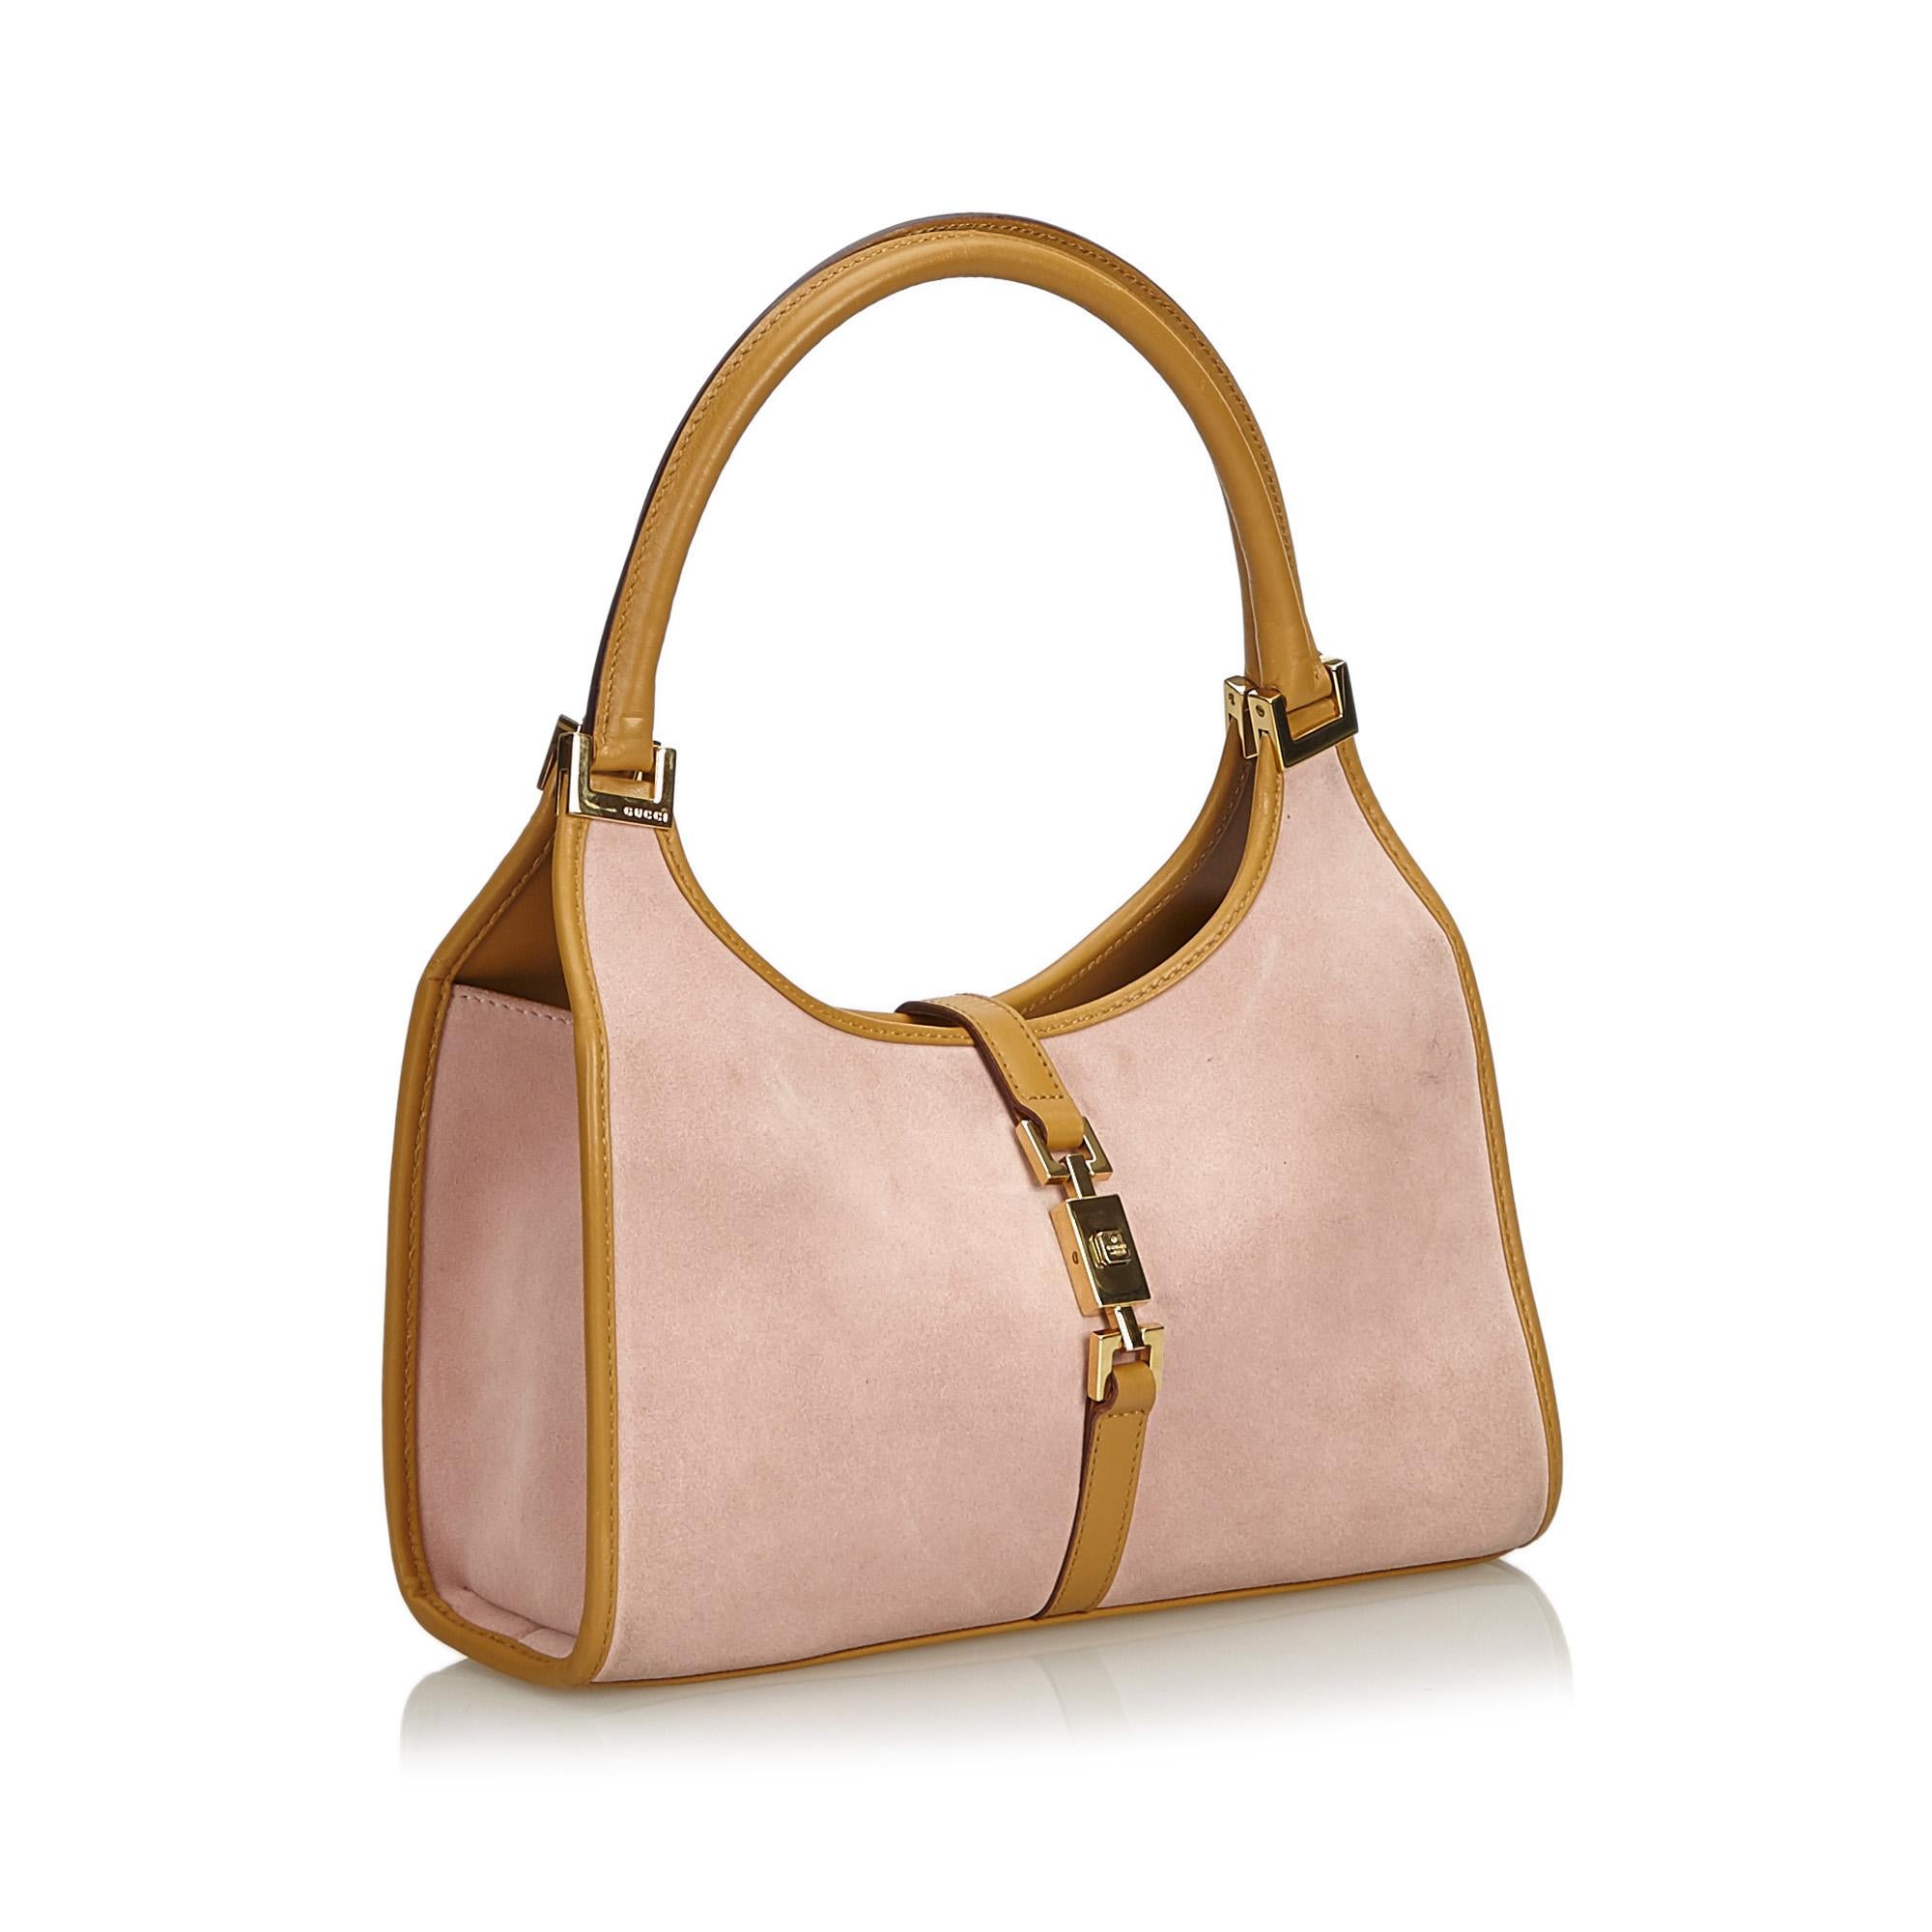 This Jackie features a suede body with leather trim, rolled leather handles, an open top with flat leather strap and push lock closure, and an interior zip pocket. It carries as B condition rating.

Inclusions: 
Dust Bag

Dimensions:
Length: 19.00